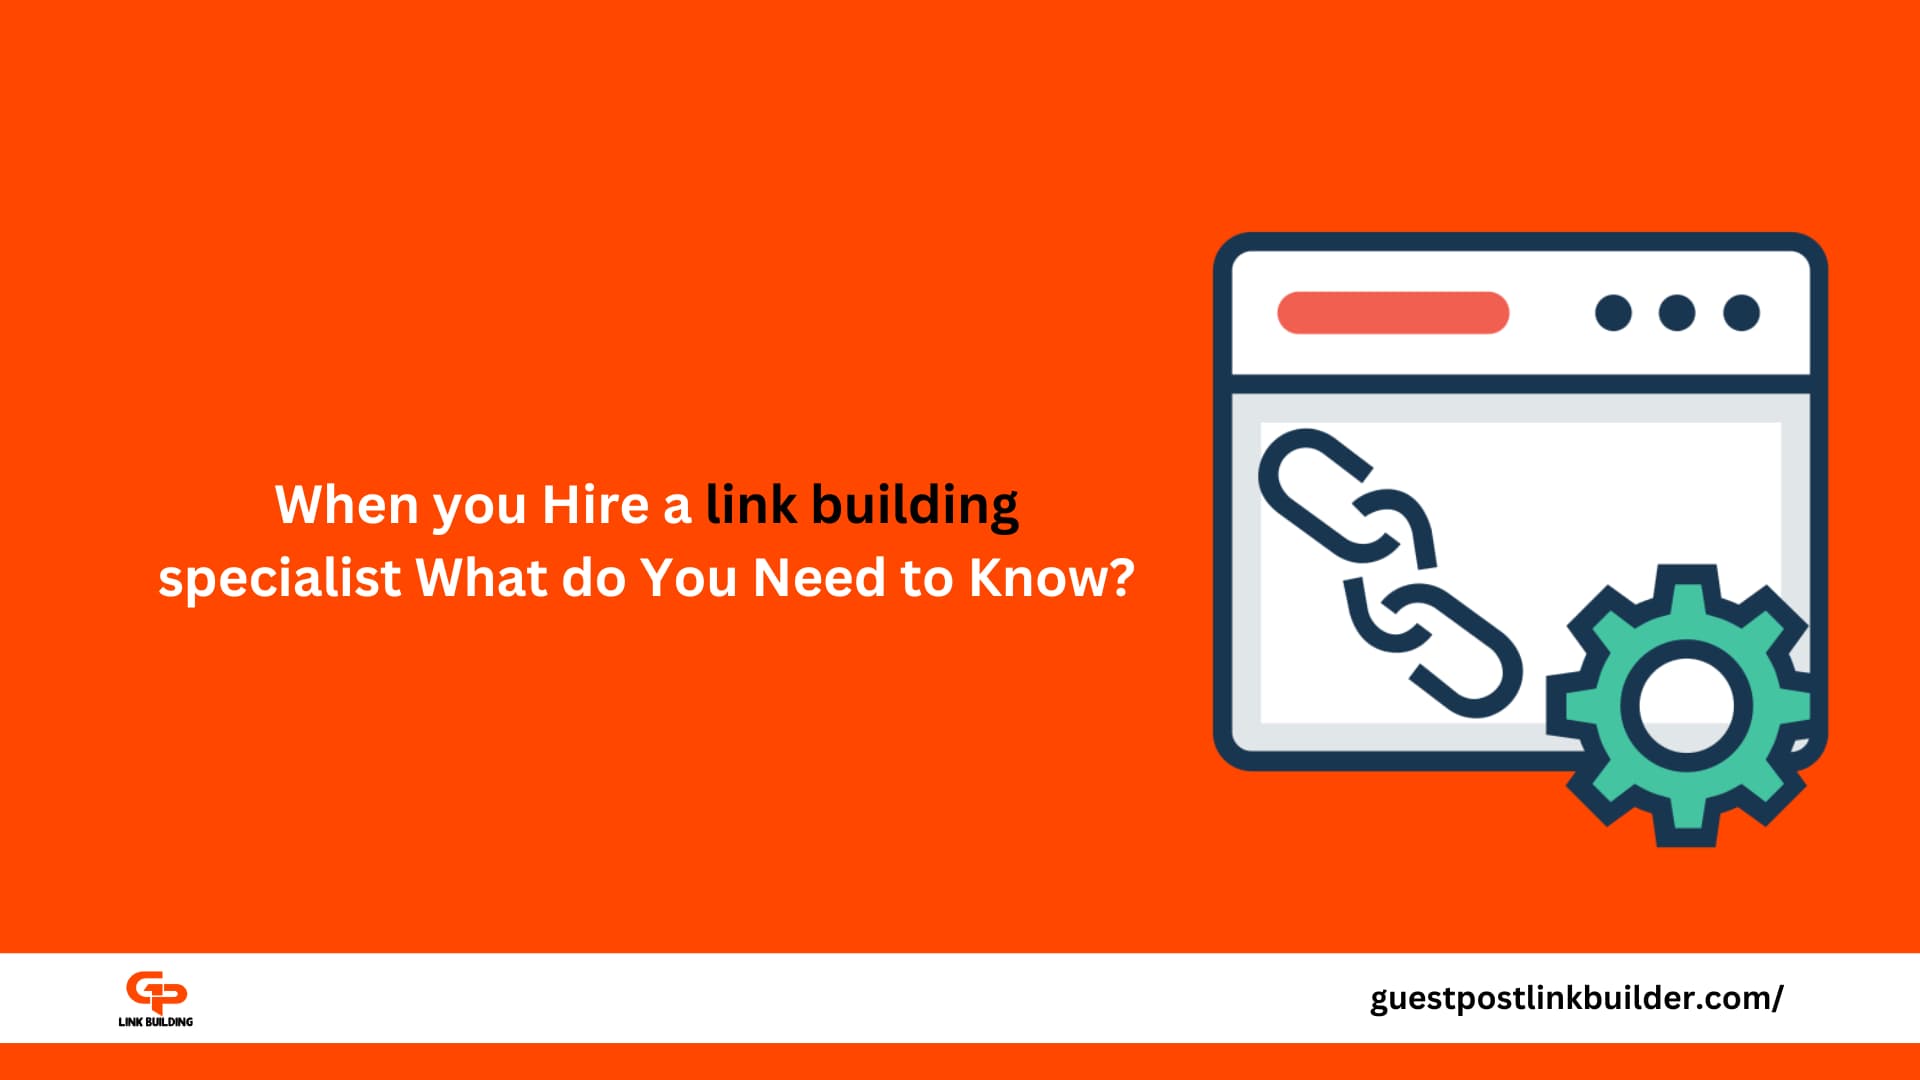 When you Hire a Link Building Specialist What do You Need to Know